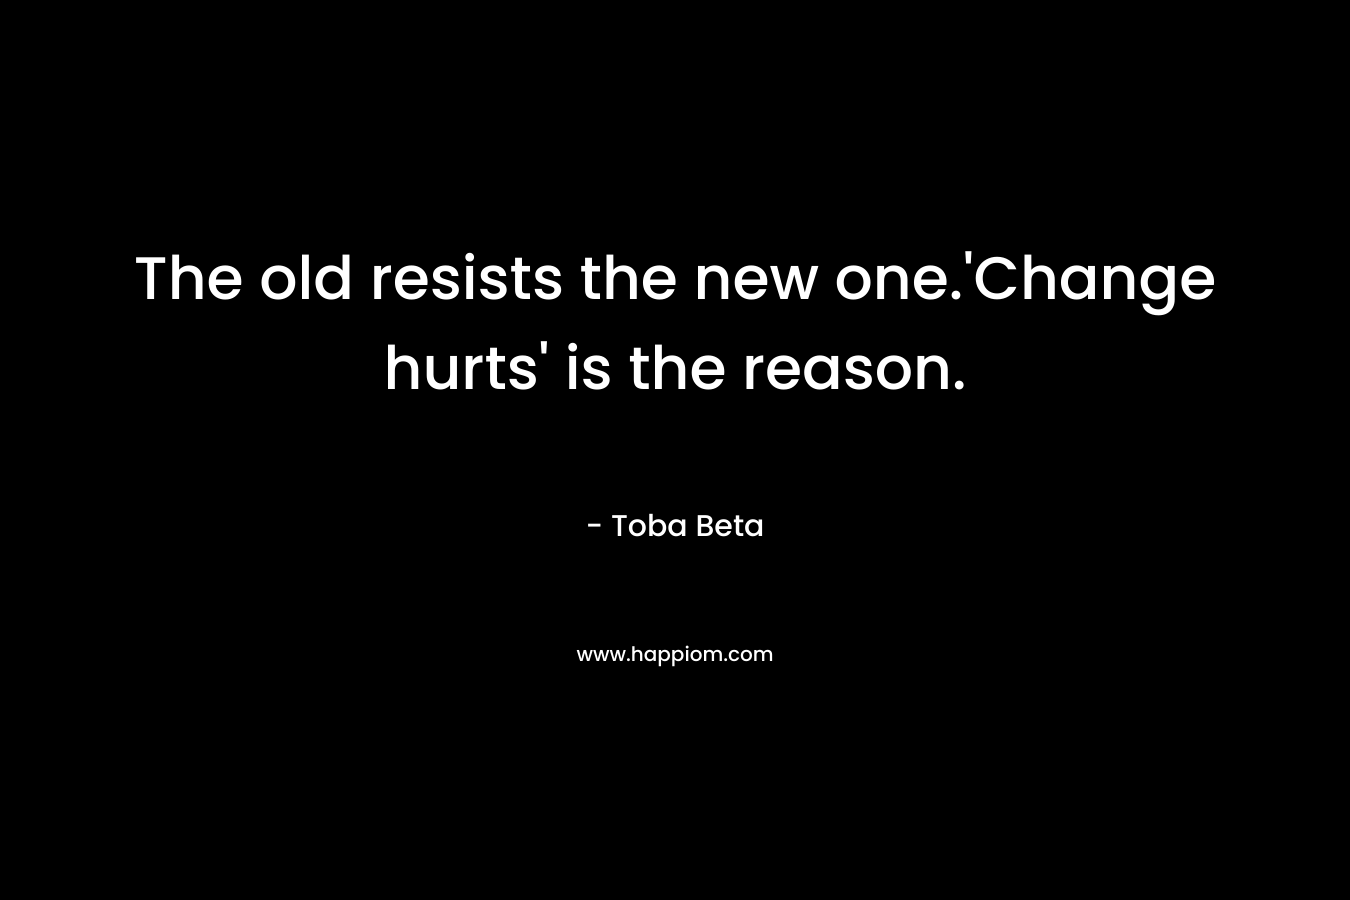 The old resists the new one.'Change hurts' is the reason.